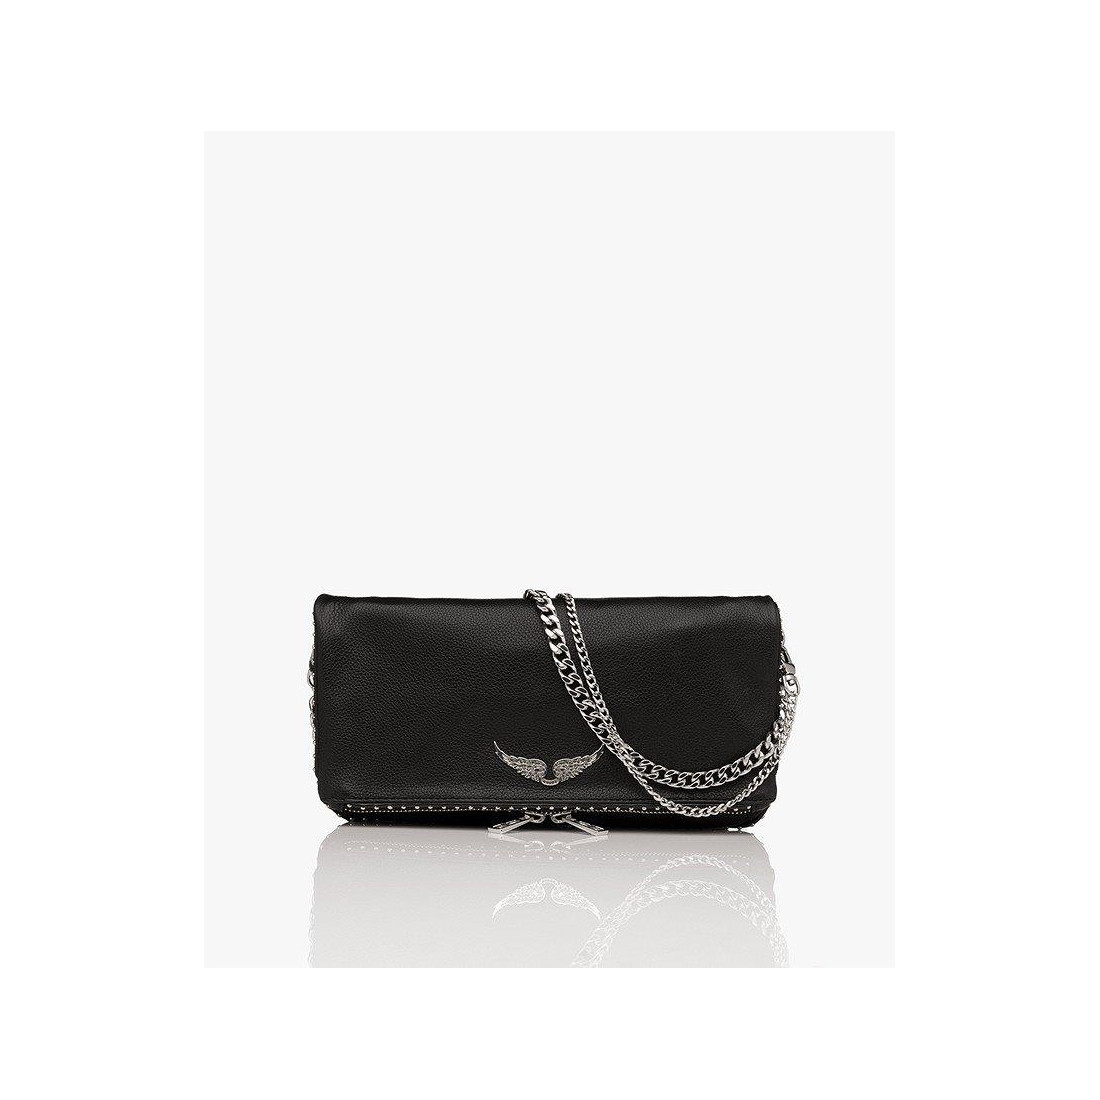 ZADIG & VOLTAIRE: crossbody bags for woman - Black  Zadig & Voltaire  crossbody bags LWBA00002 online at